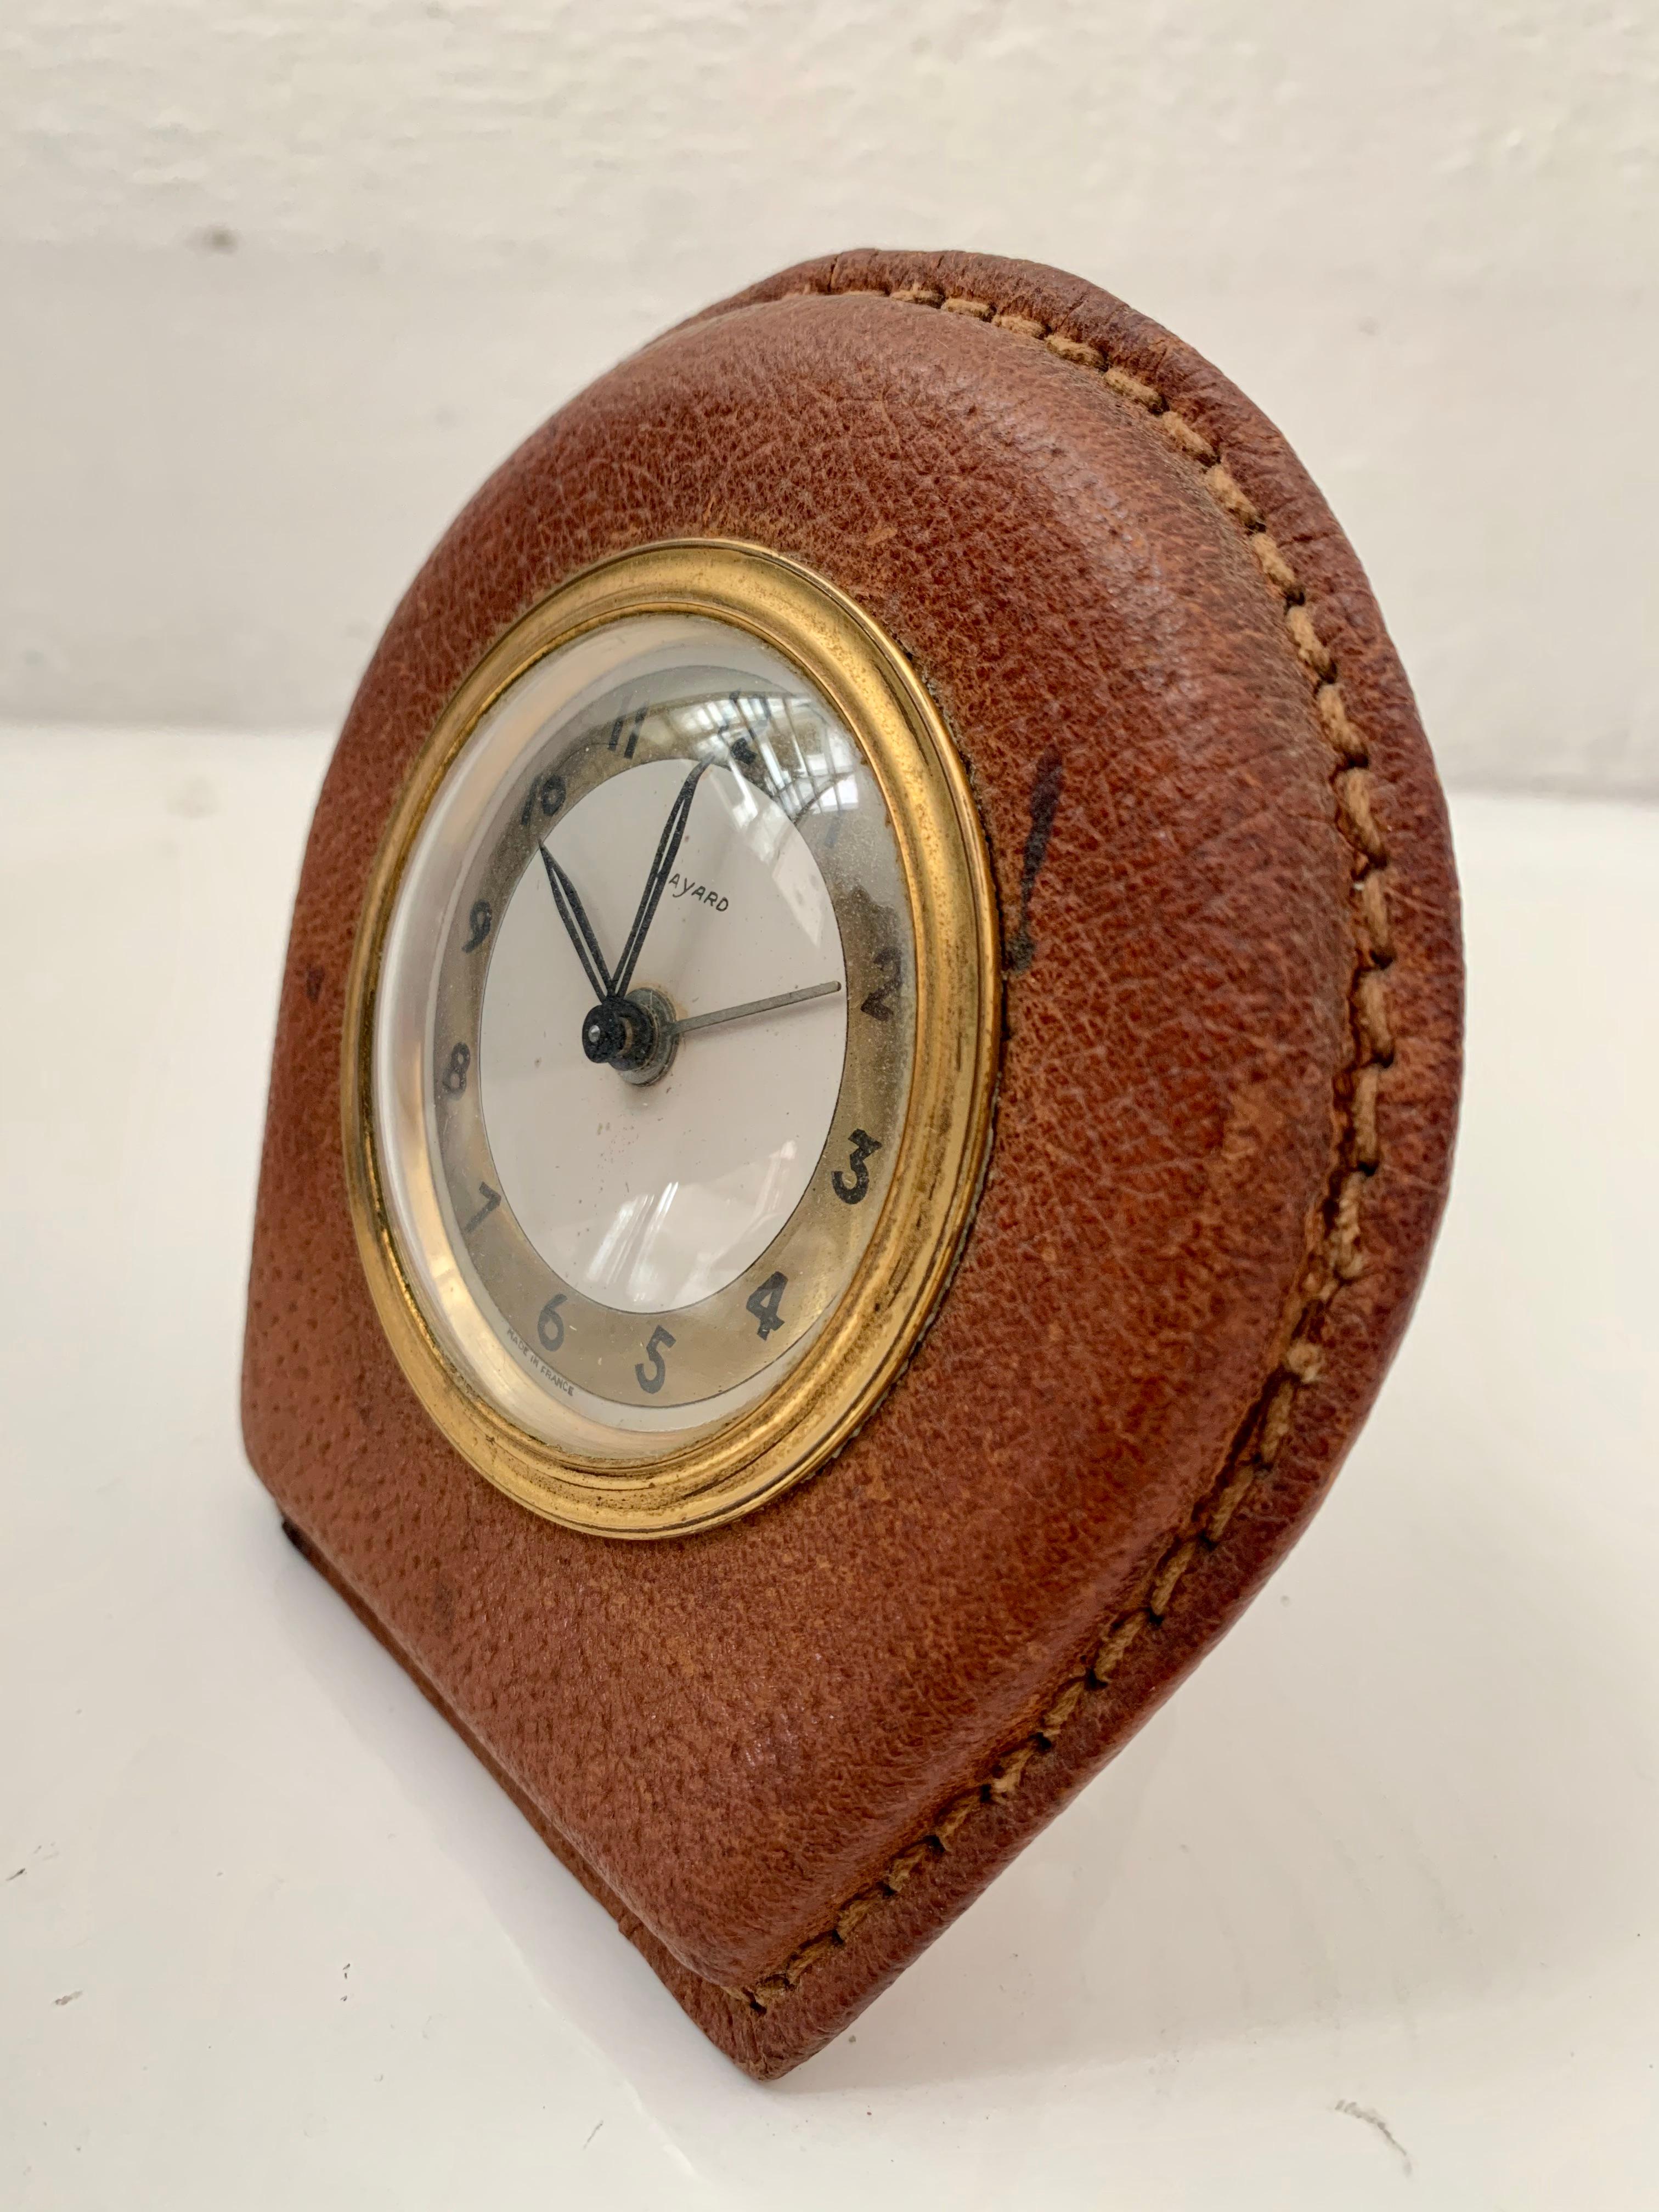 Adnet Style Leather Alarm Clock by Bayard In Excellent Condition For Sale In Los Angeles, CA